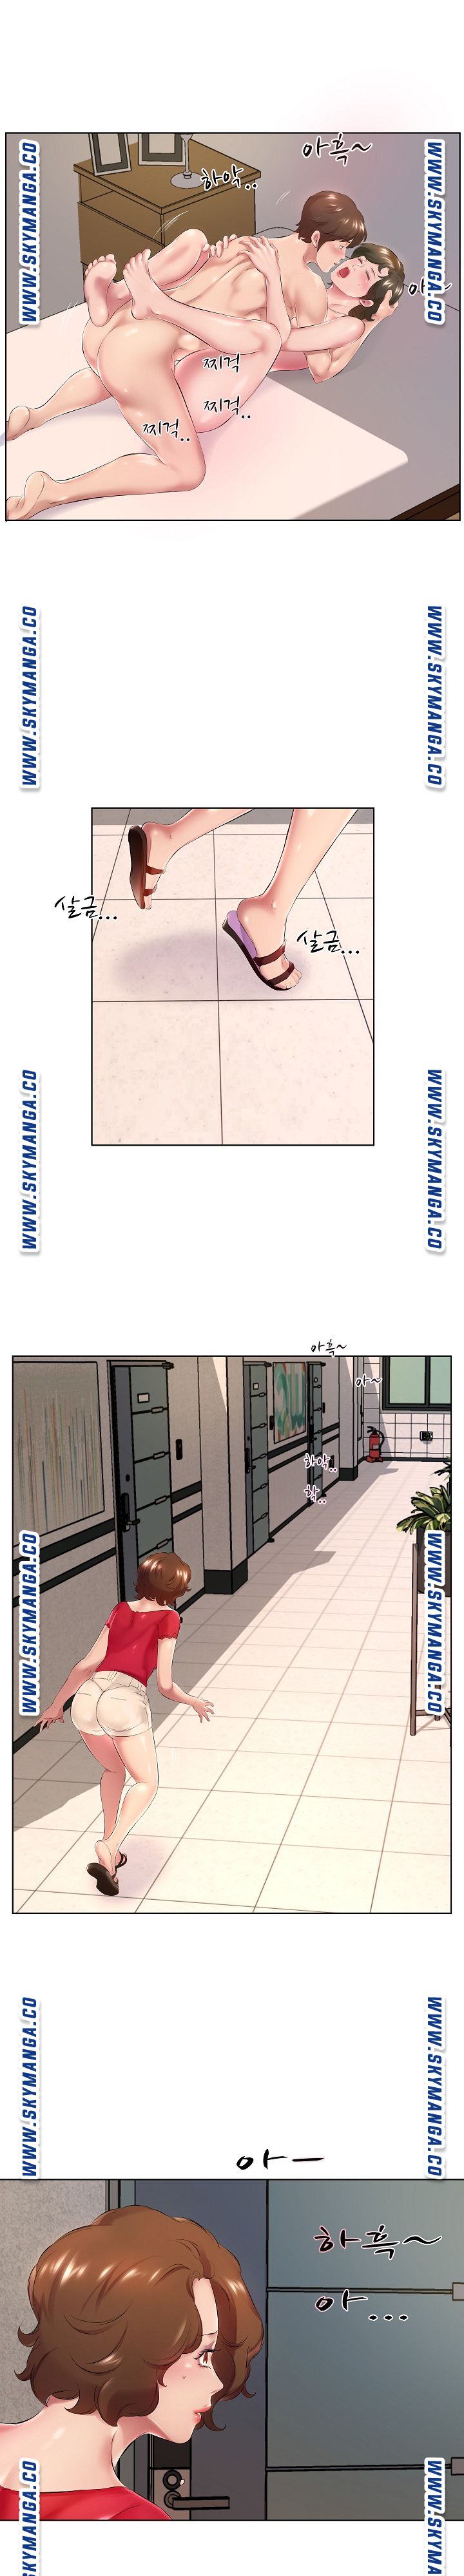 One Room Hotel Raw - Chapter 1 Page 5